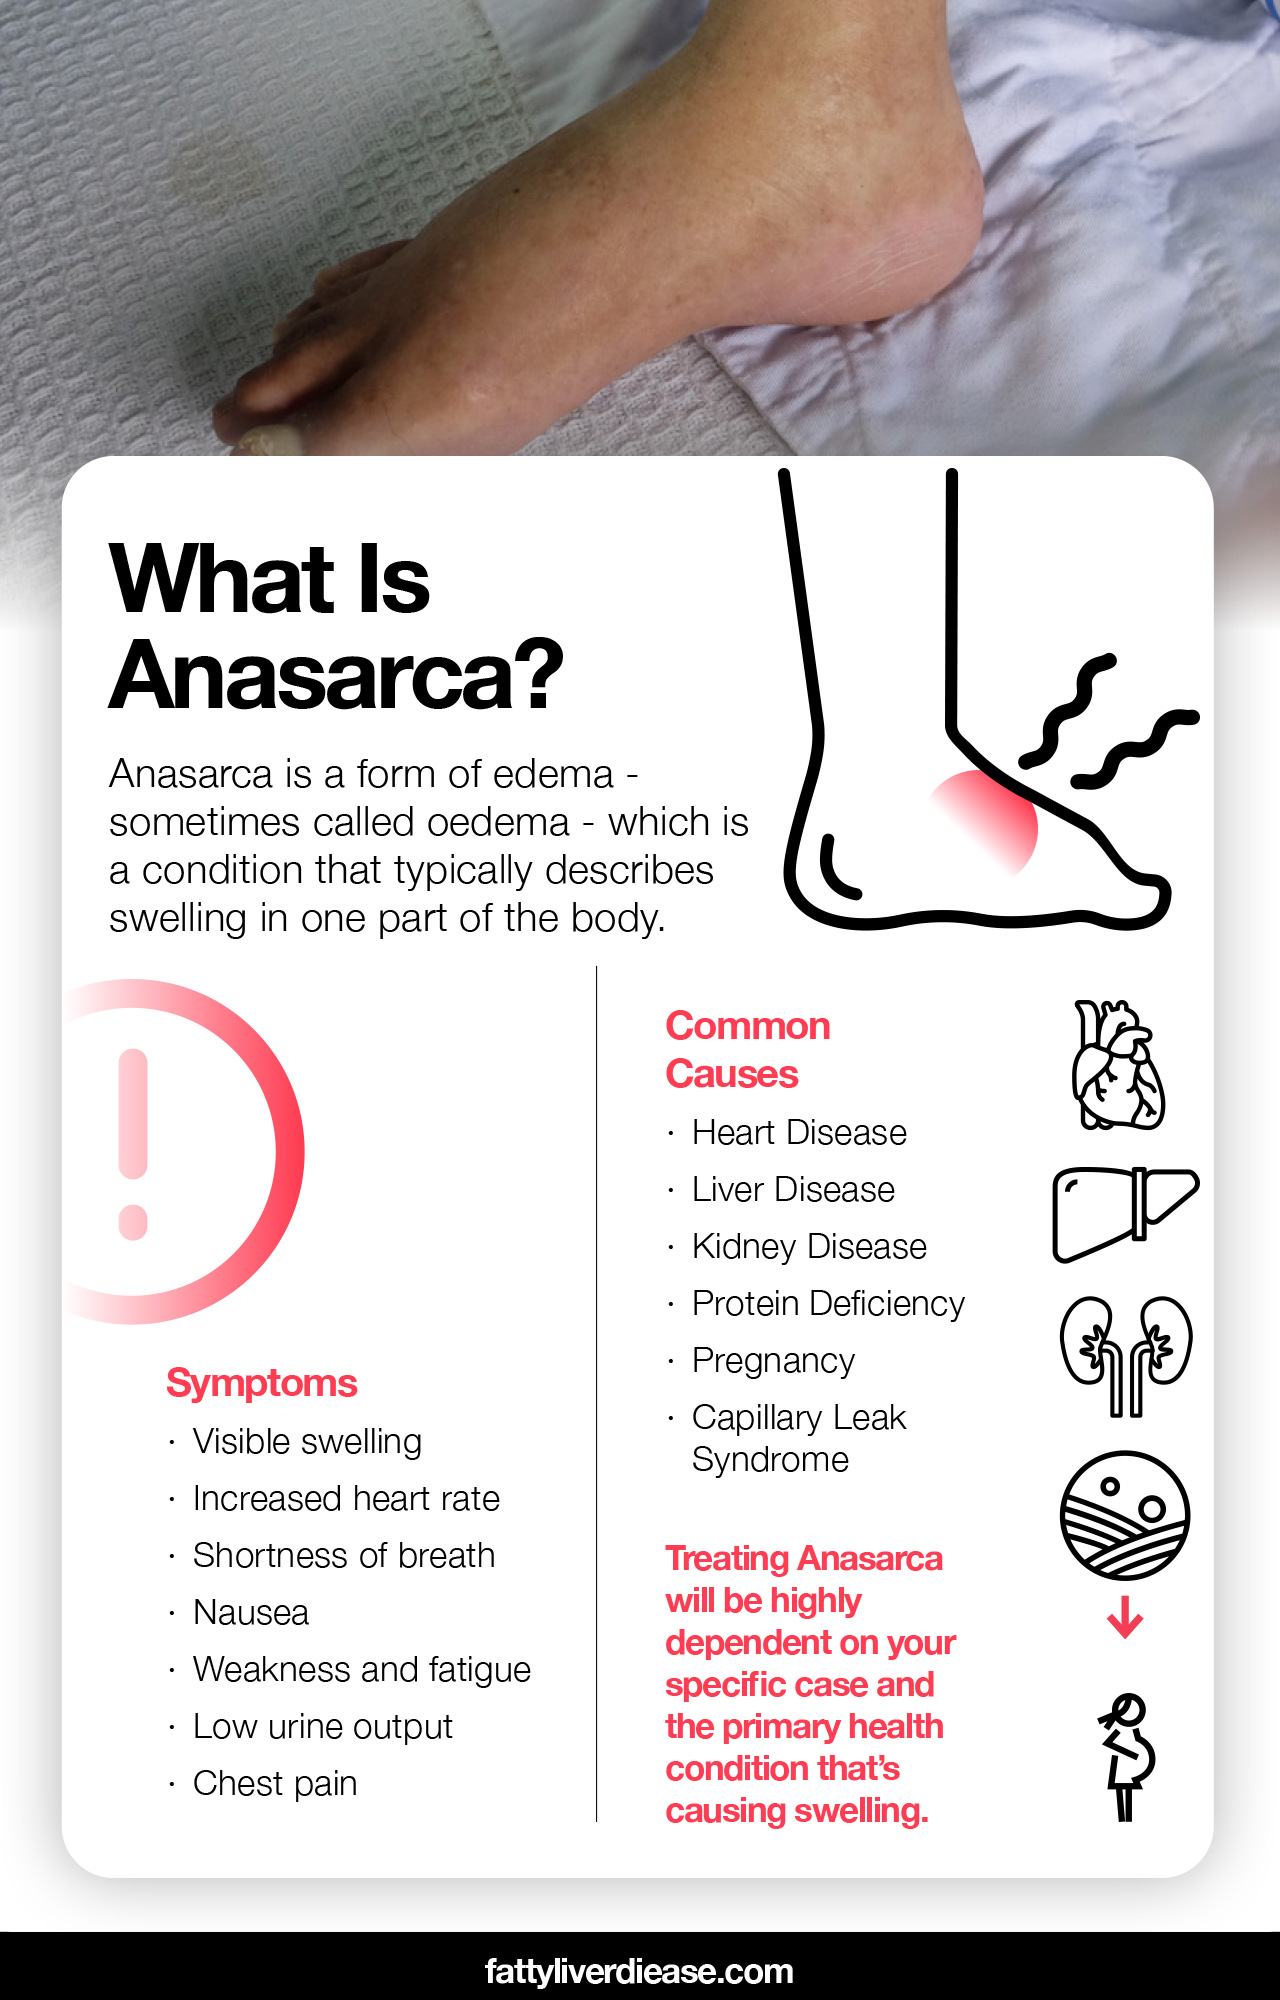 What You Need to Know About Anasarca